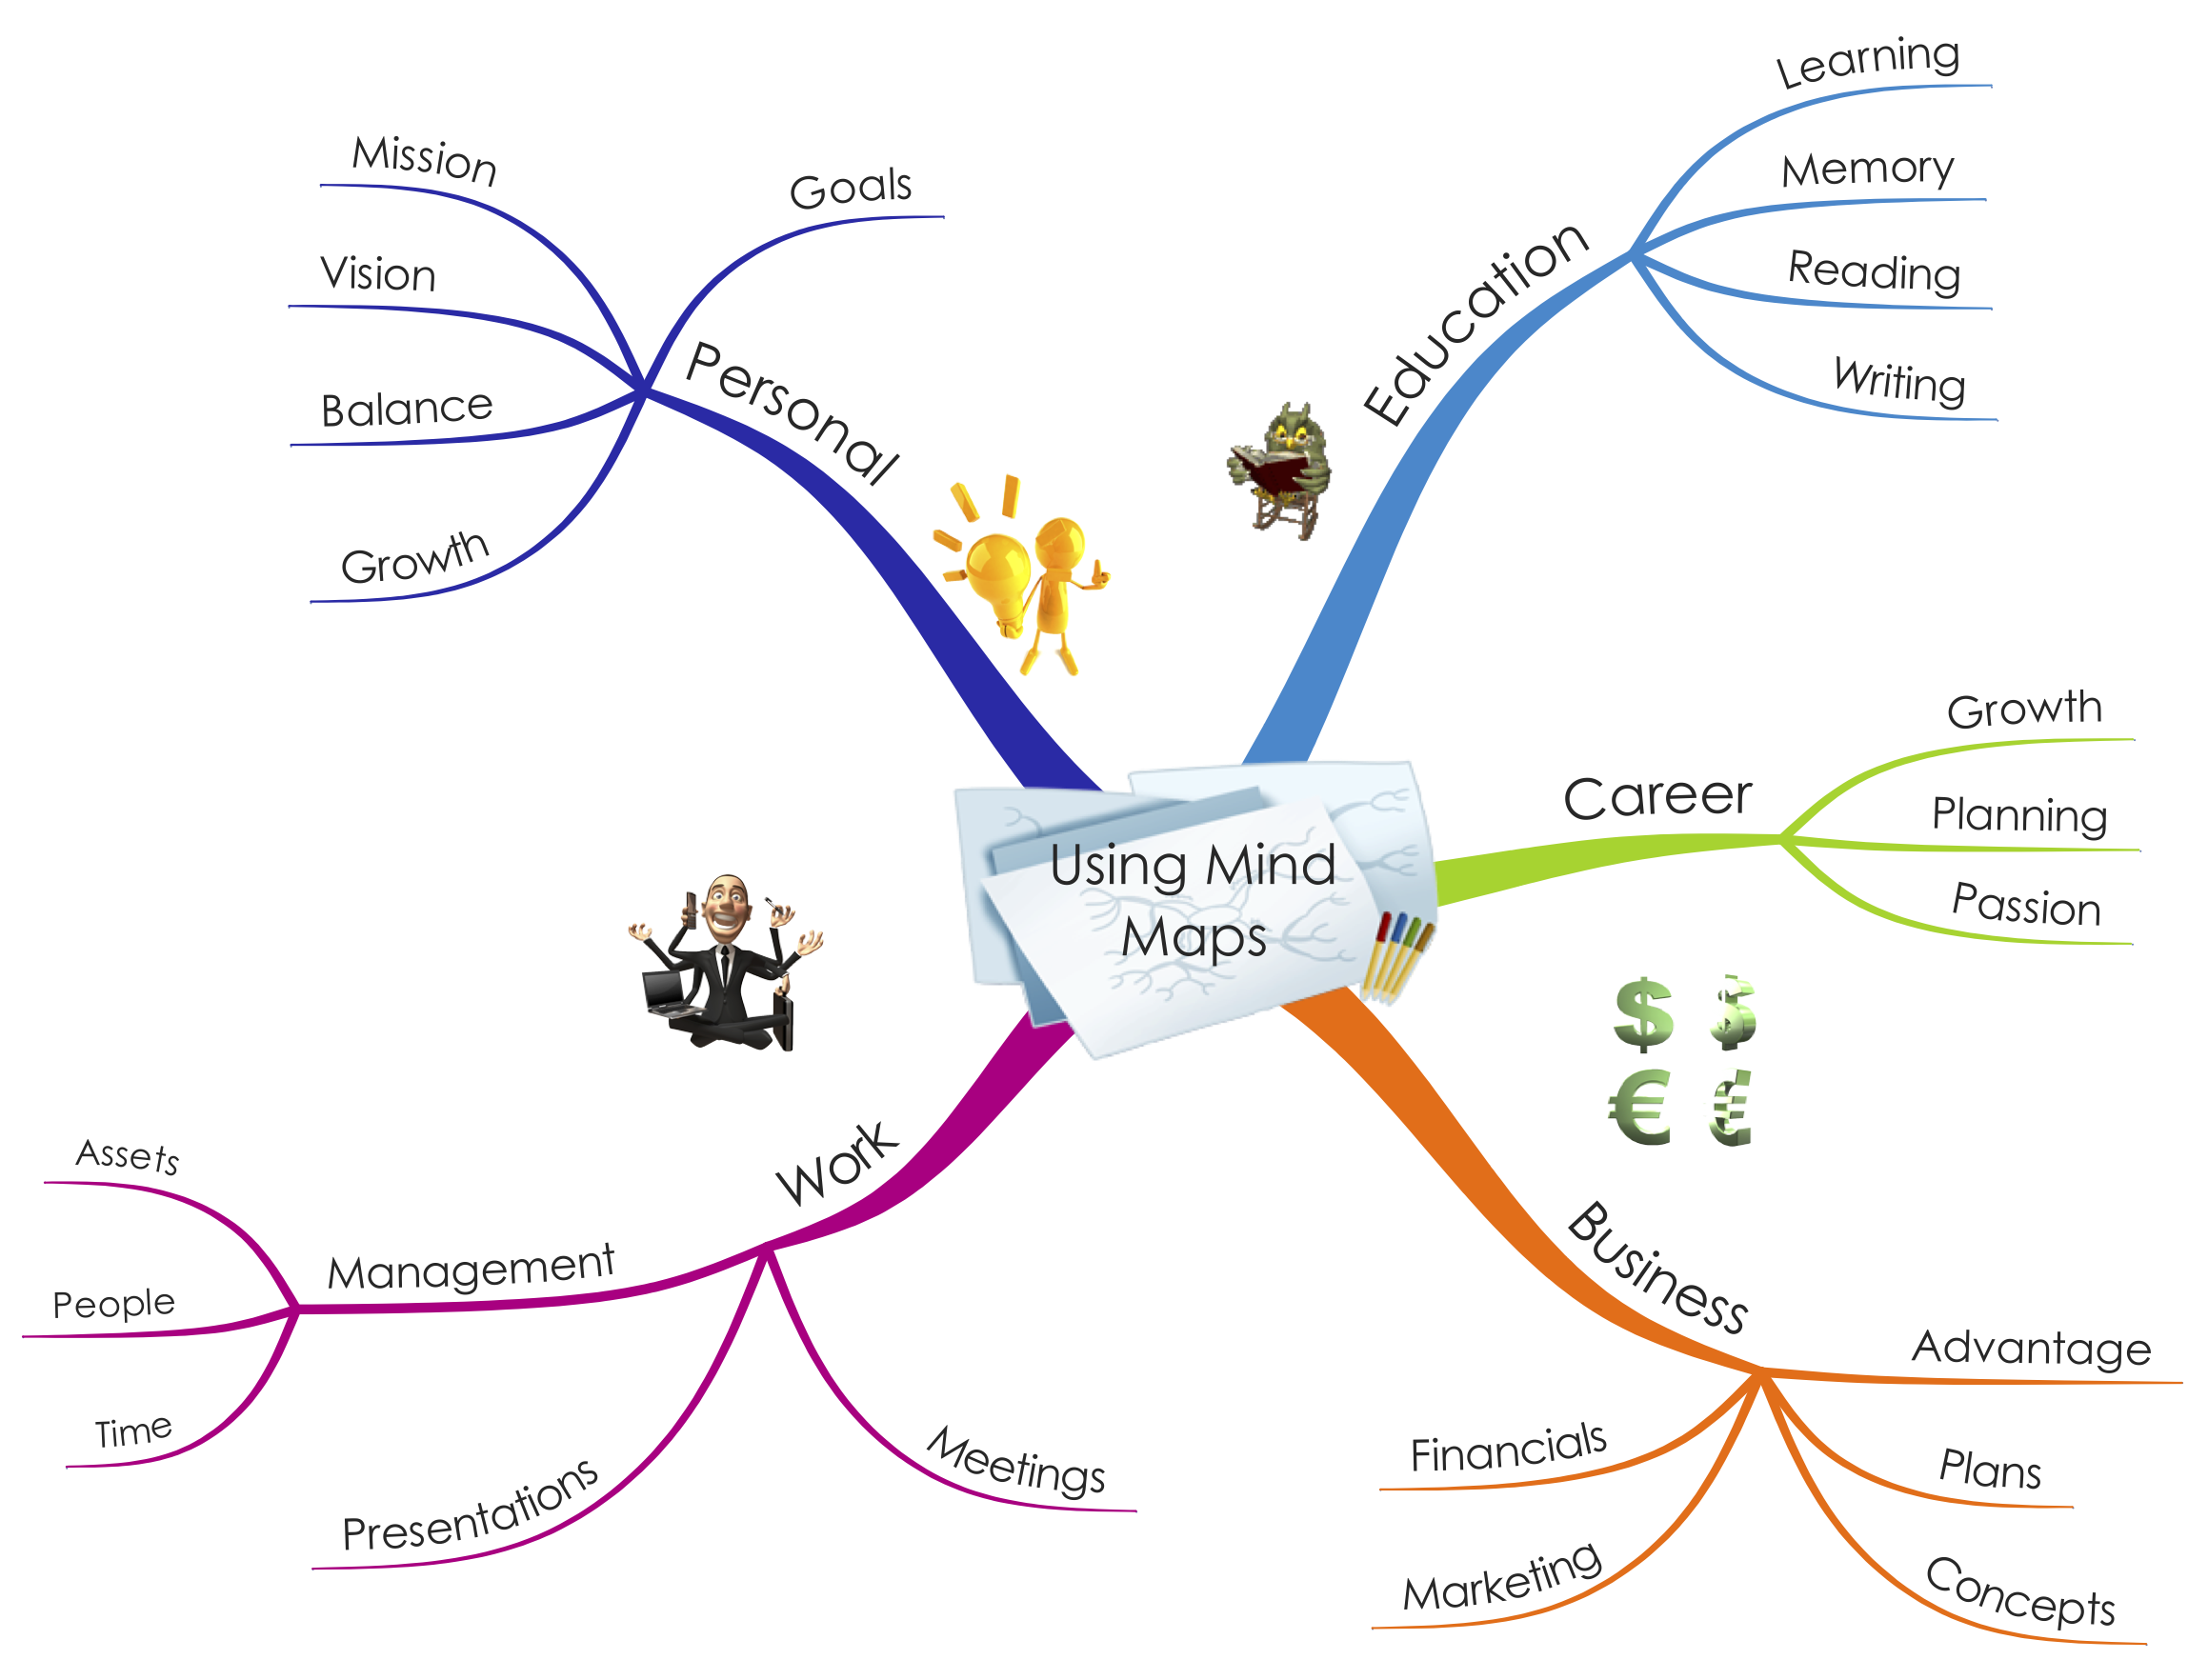 Interactive Mind Map